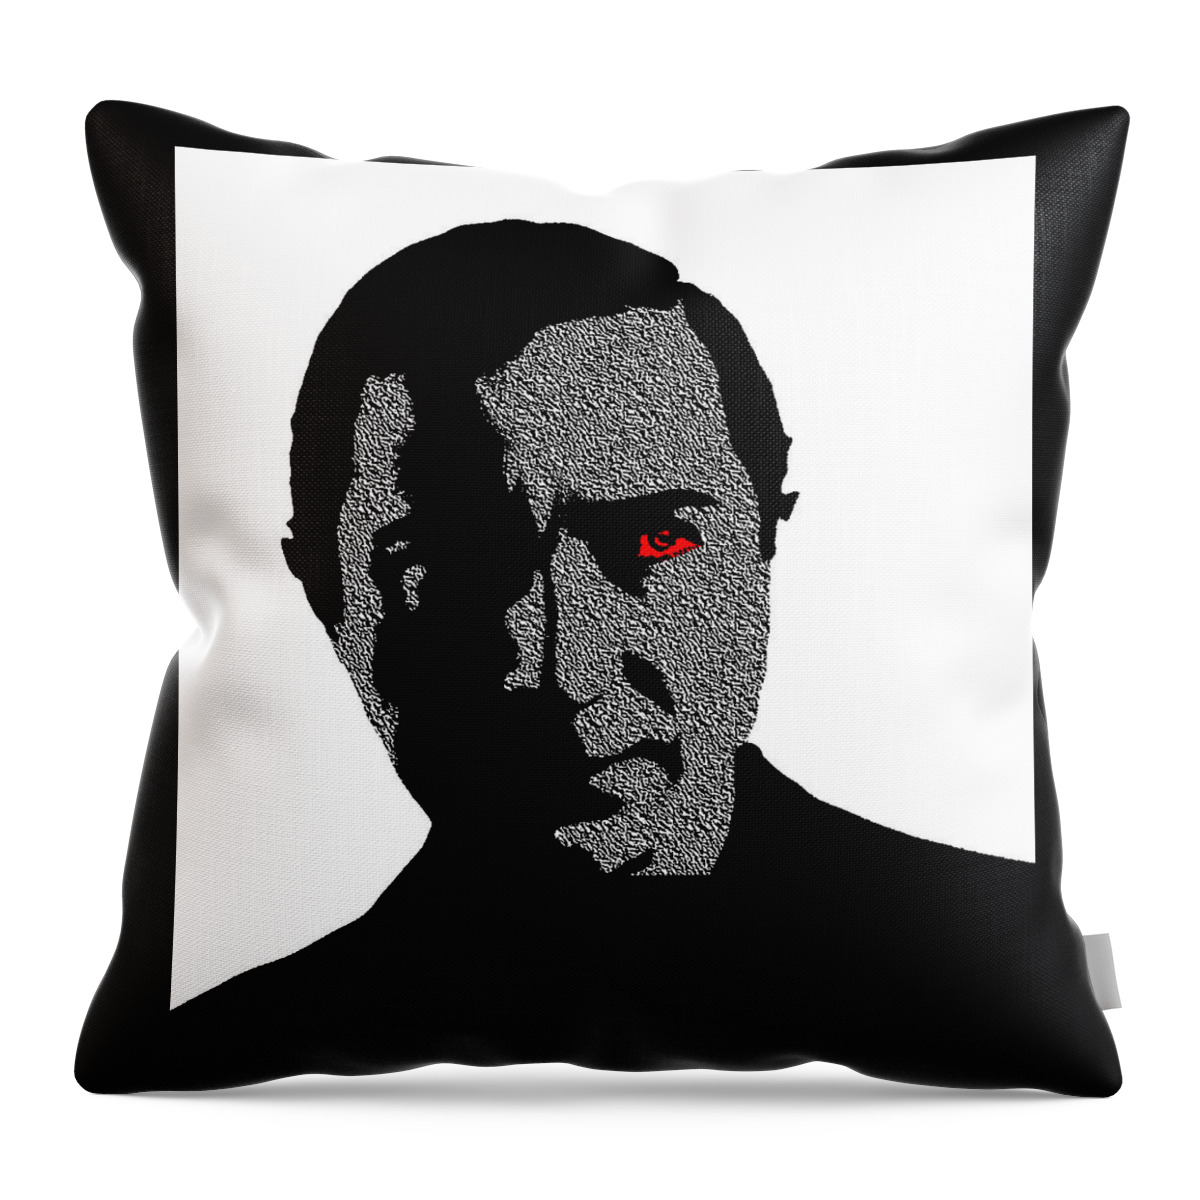 Bela Lugosi Throw Pillow featuring the photograph Bela Lugosi by Emme Pons